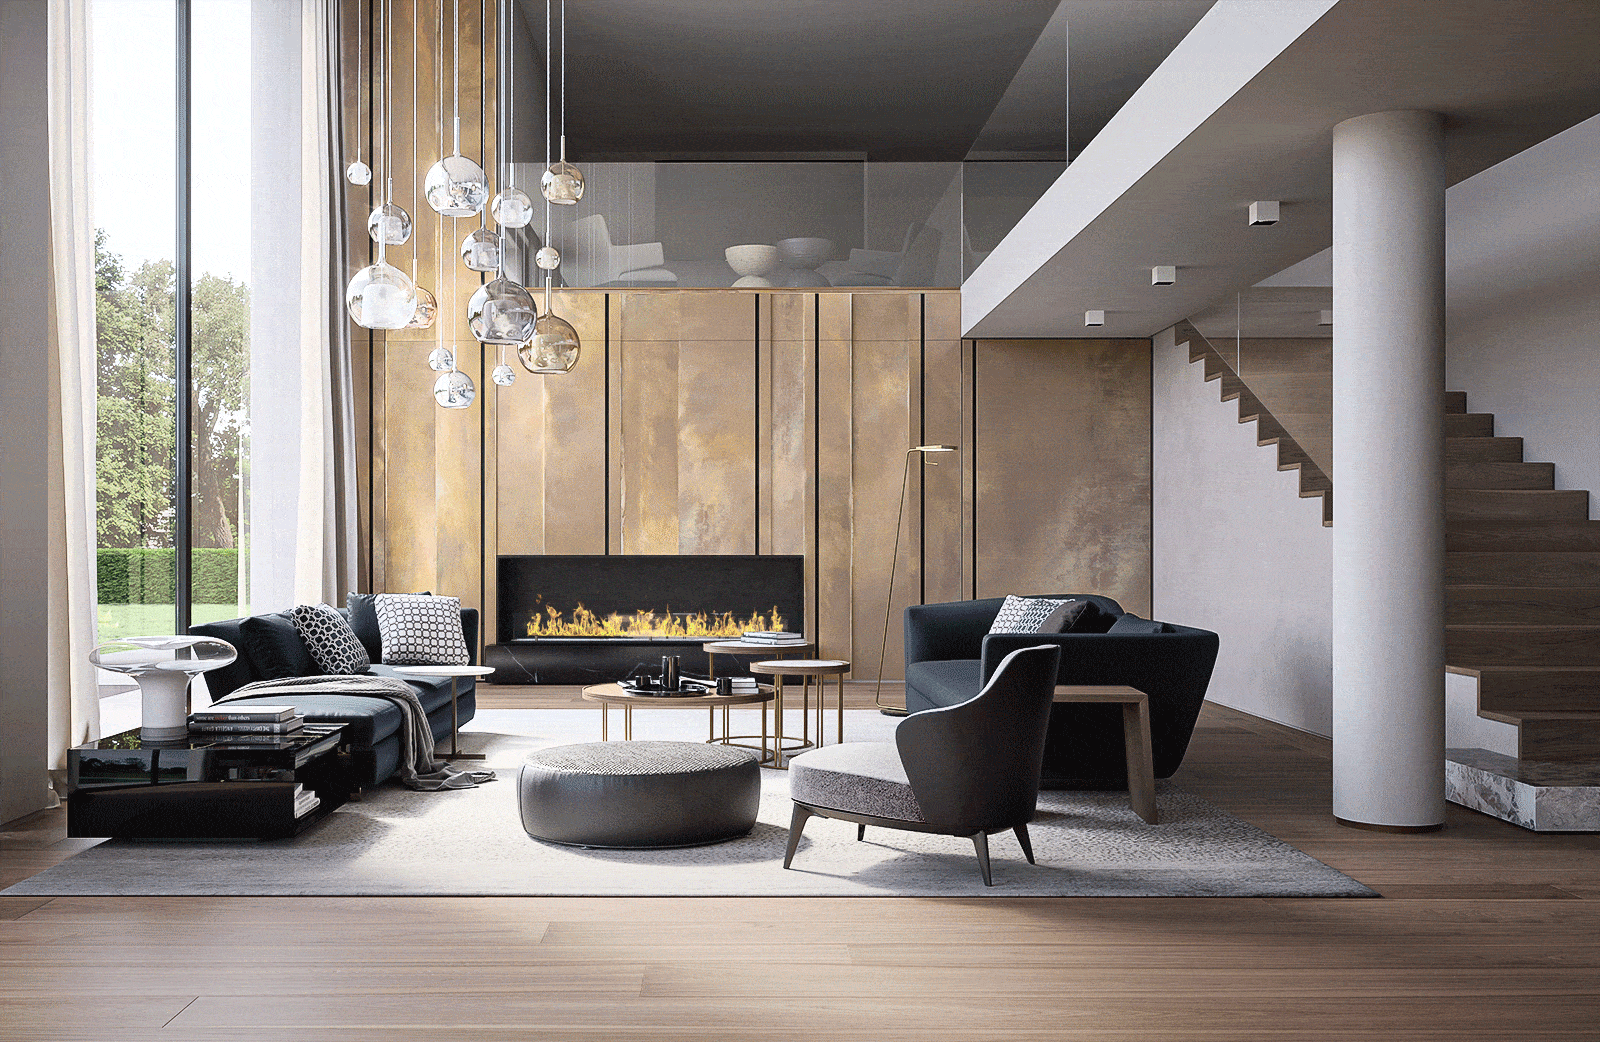 Living room with wooden elements and fireplace - Wood Interiors